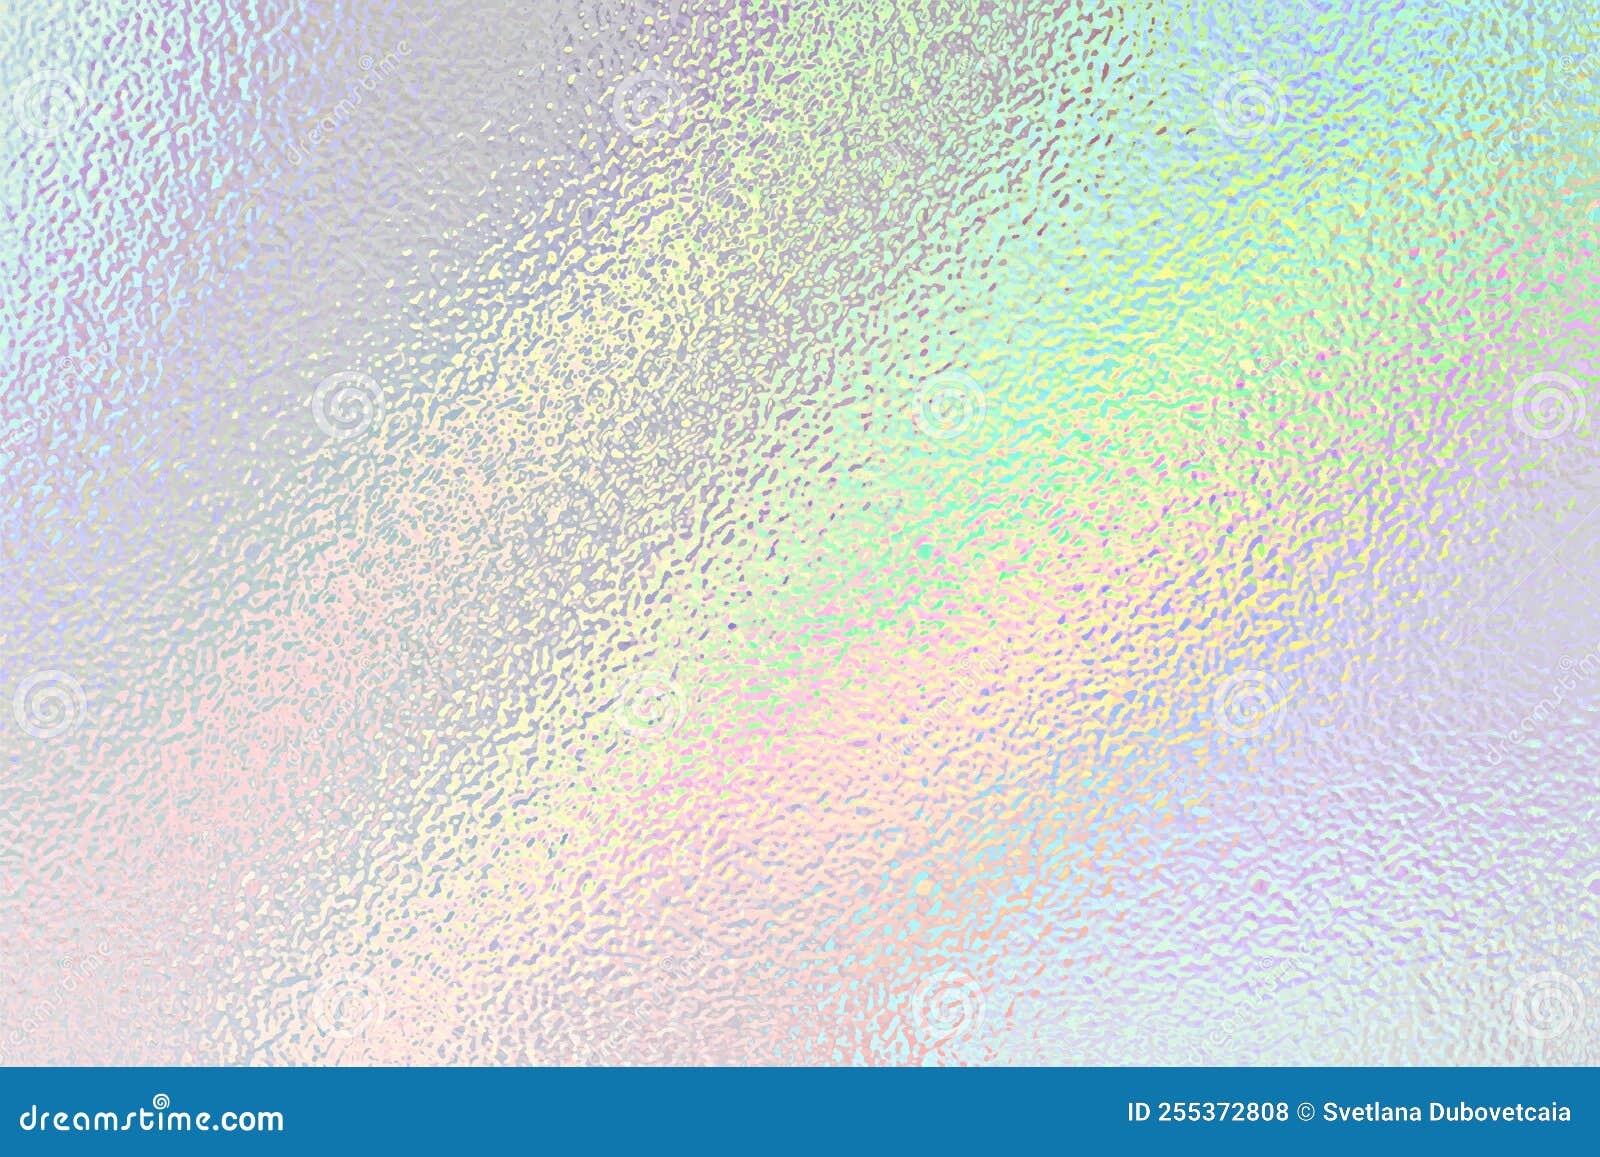 holograph background. holographic texture foil effect. hologram abstract backdrop. iridescent backdrop. rainbow gradient. pearlesc